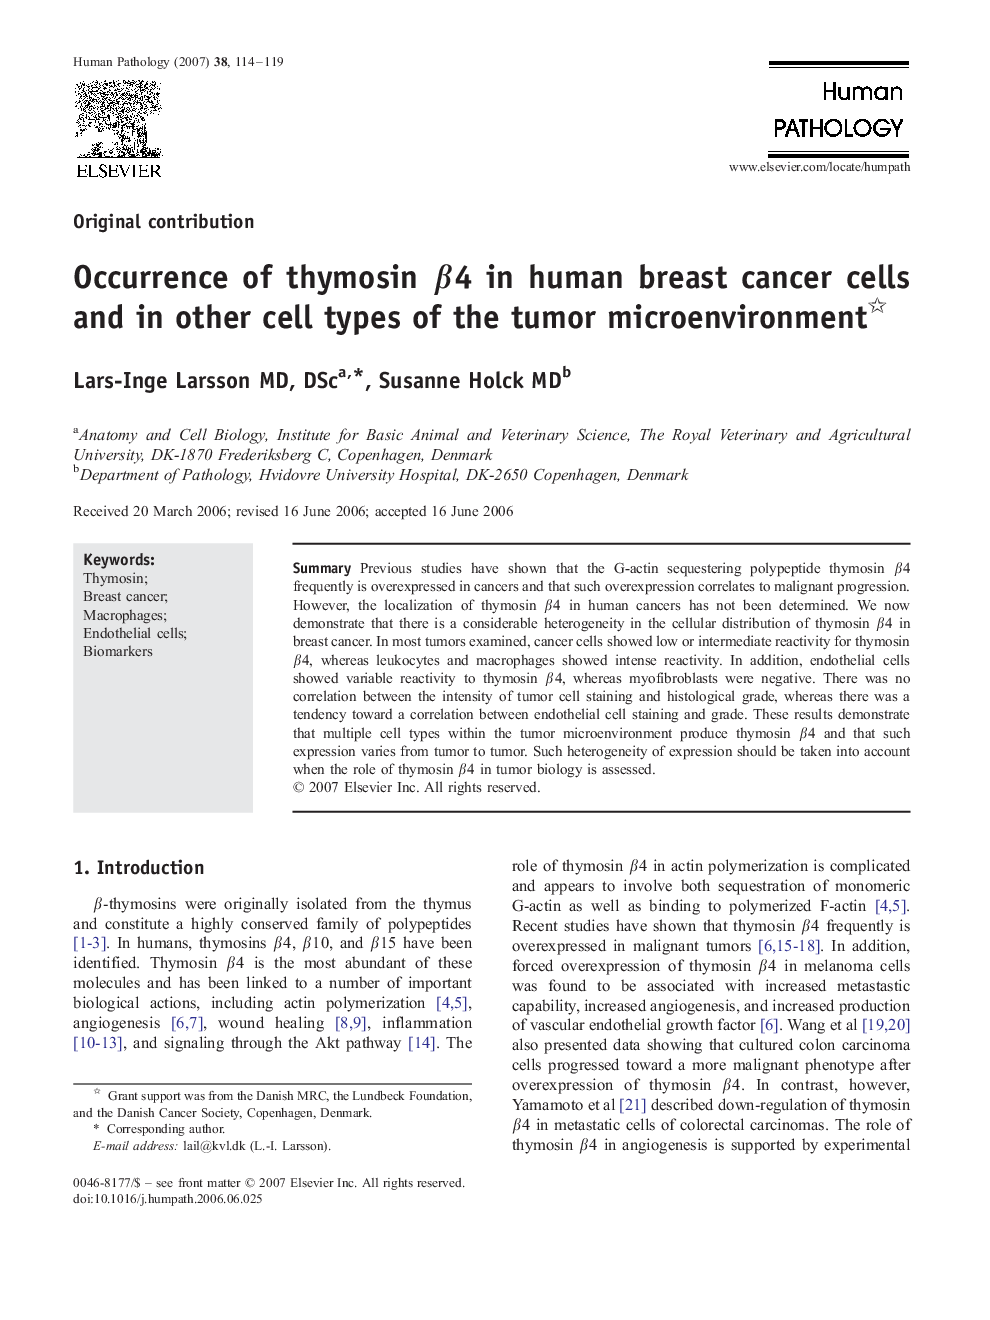 Occurrence of thymosin β4 in human breast cancer cells and in other cell types of the tumor microenvironment 